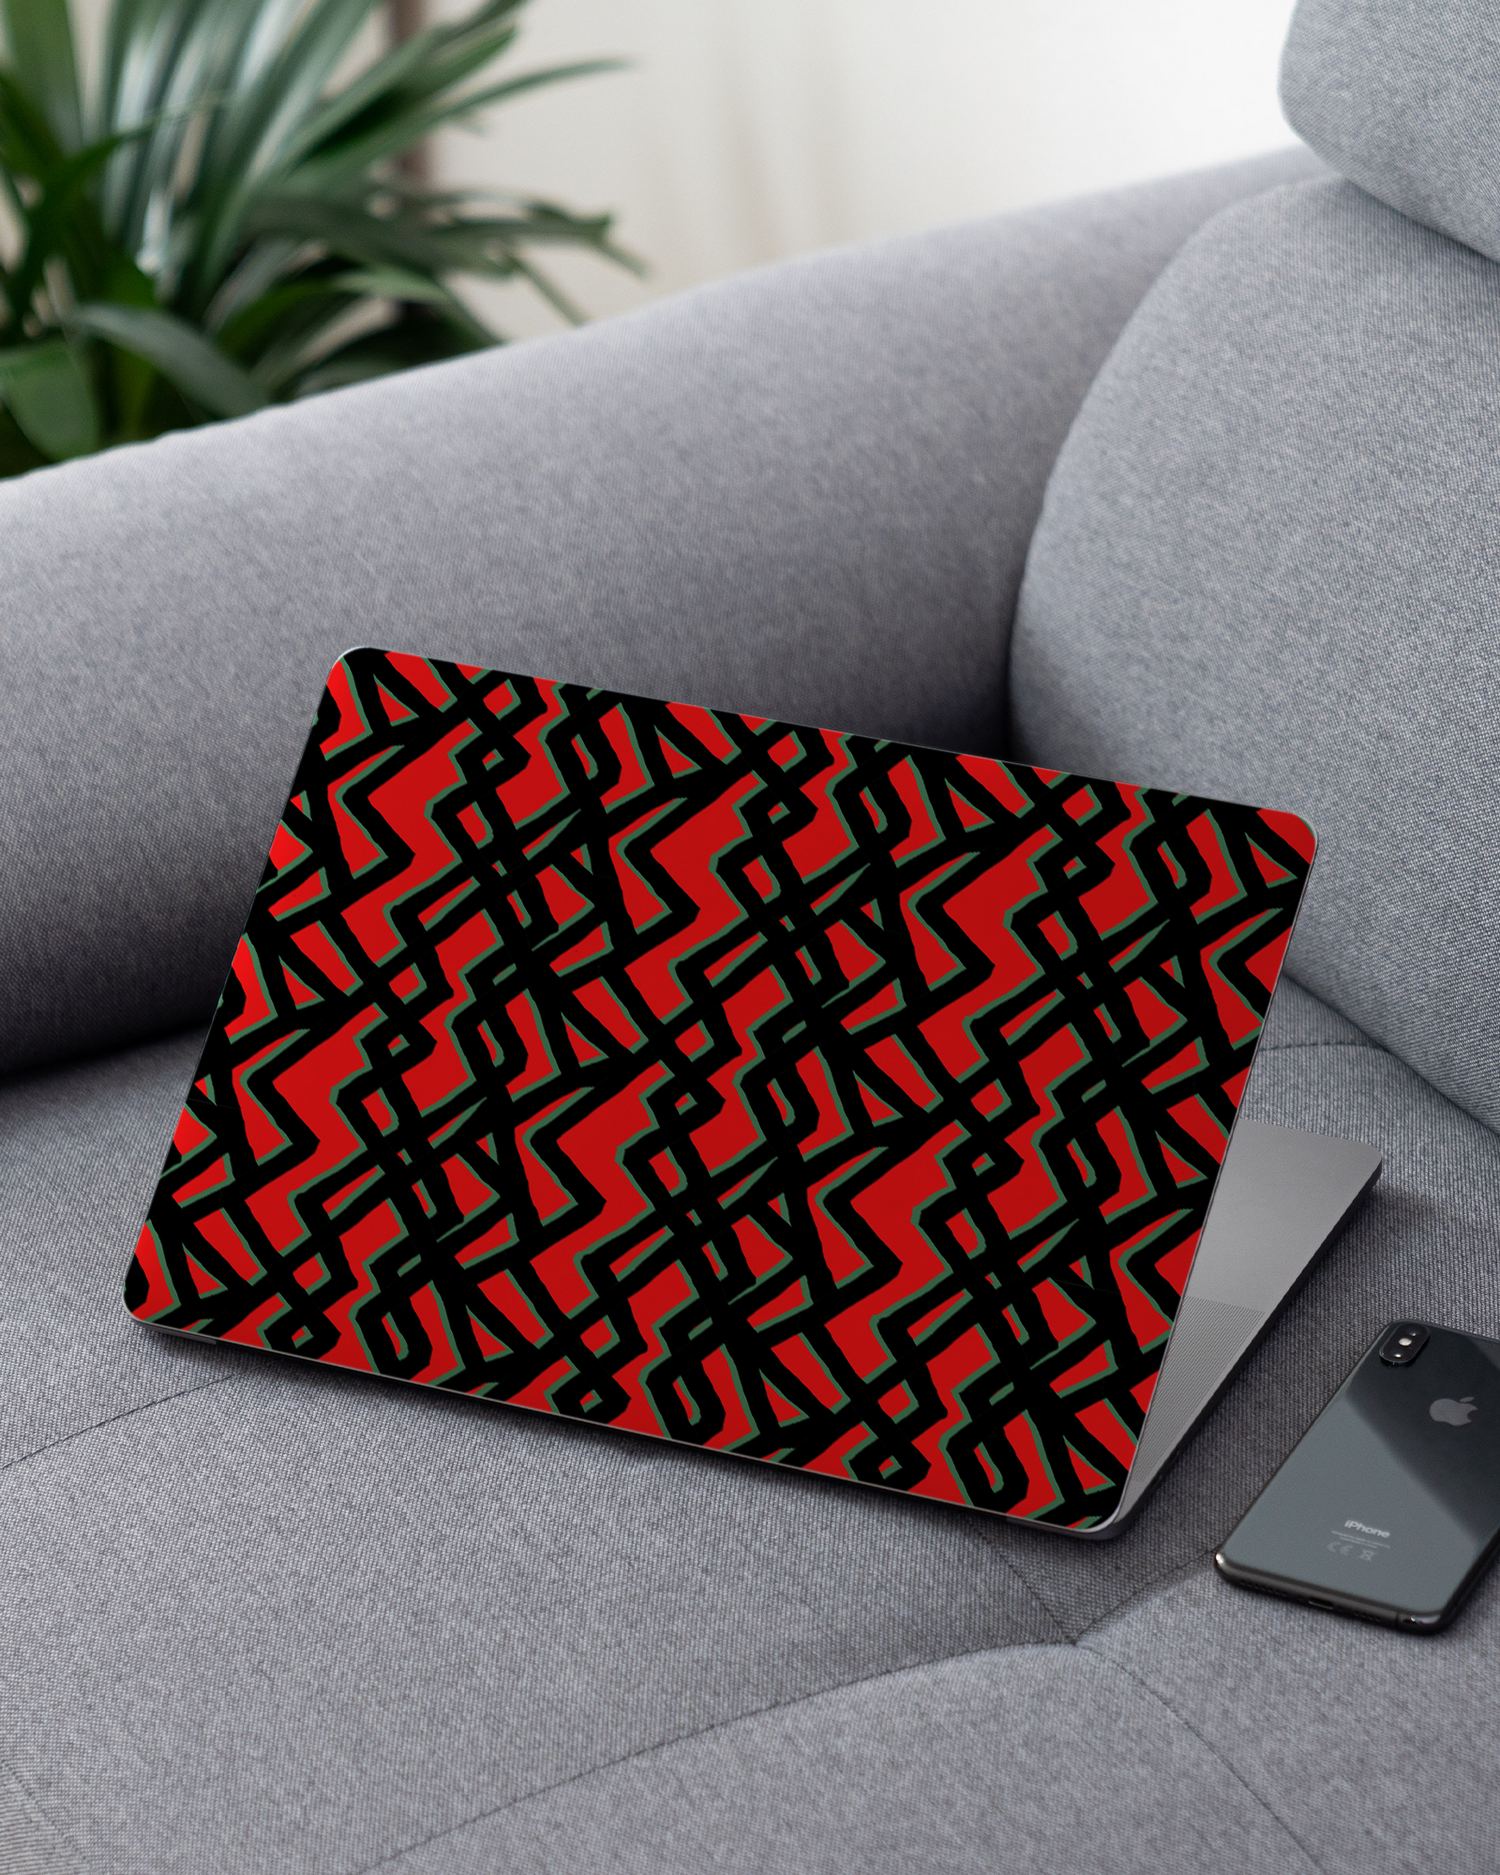 Fences Pattern Laptop Skin for 13 inch Apple MacBooks on a couch